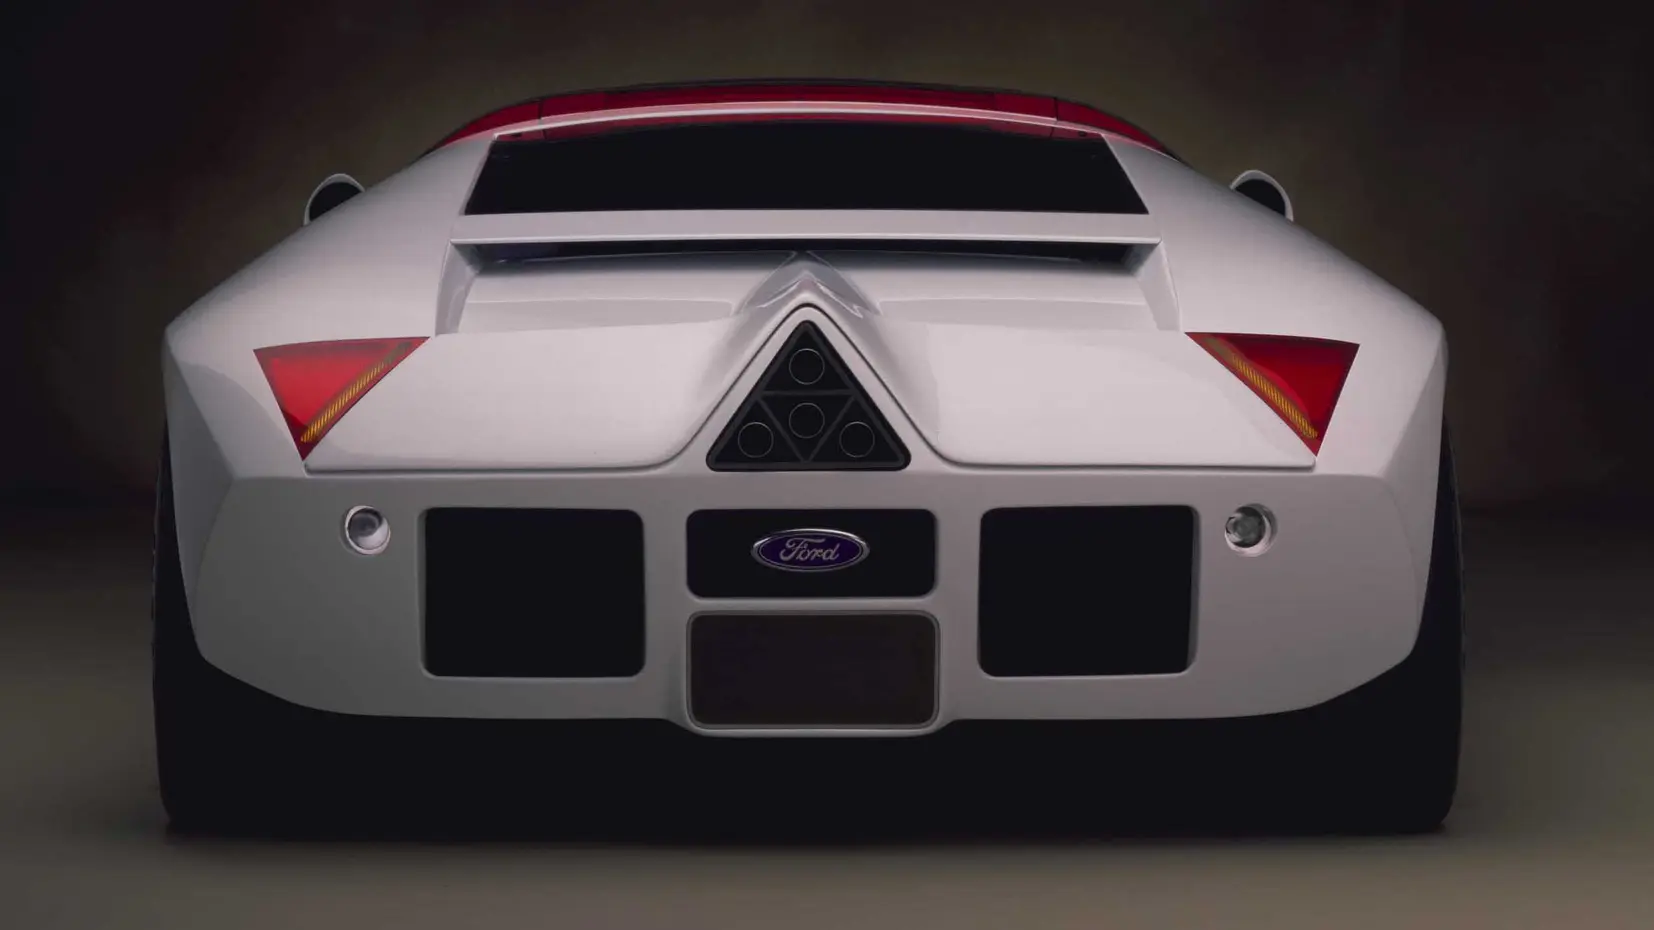 The story of the Ford GT90